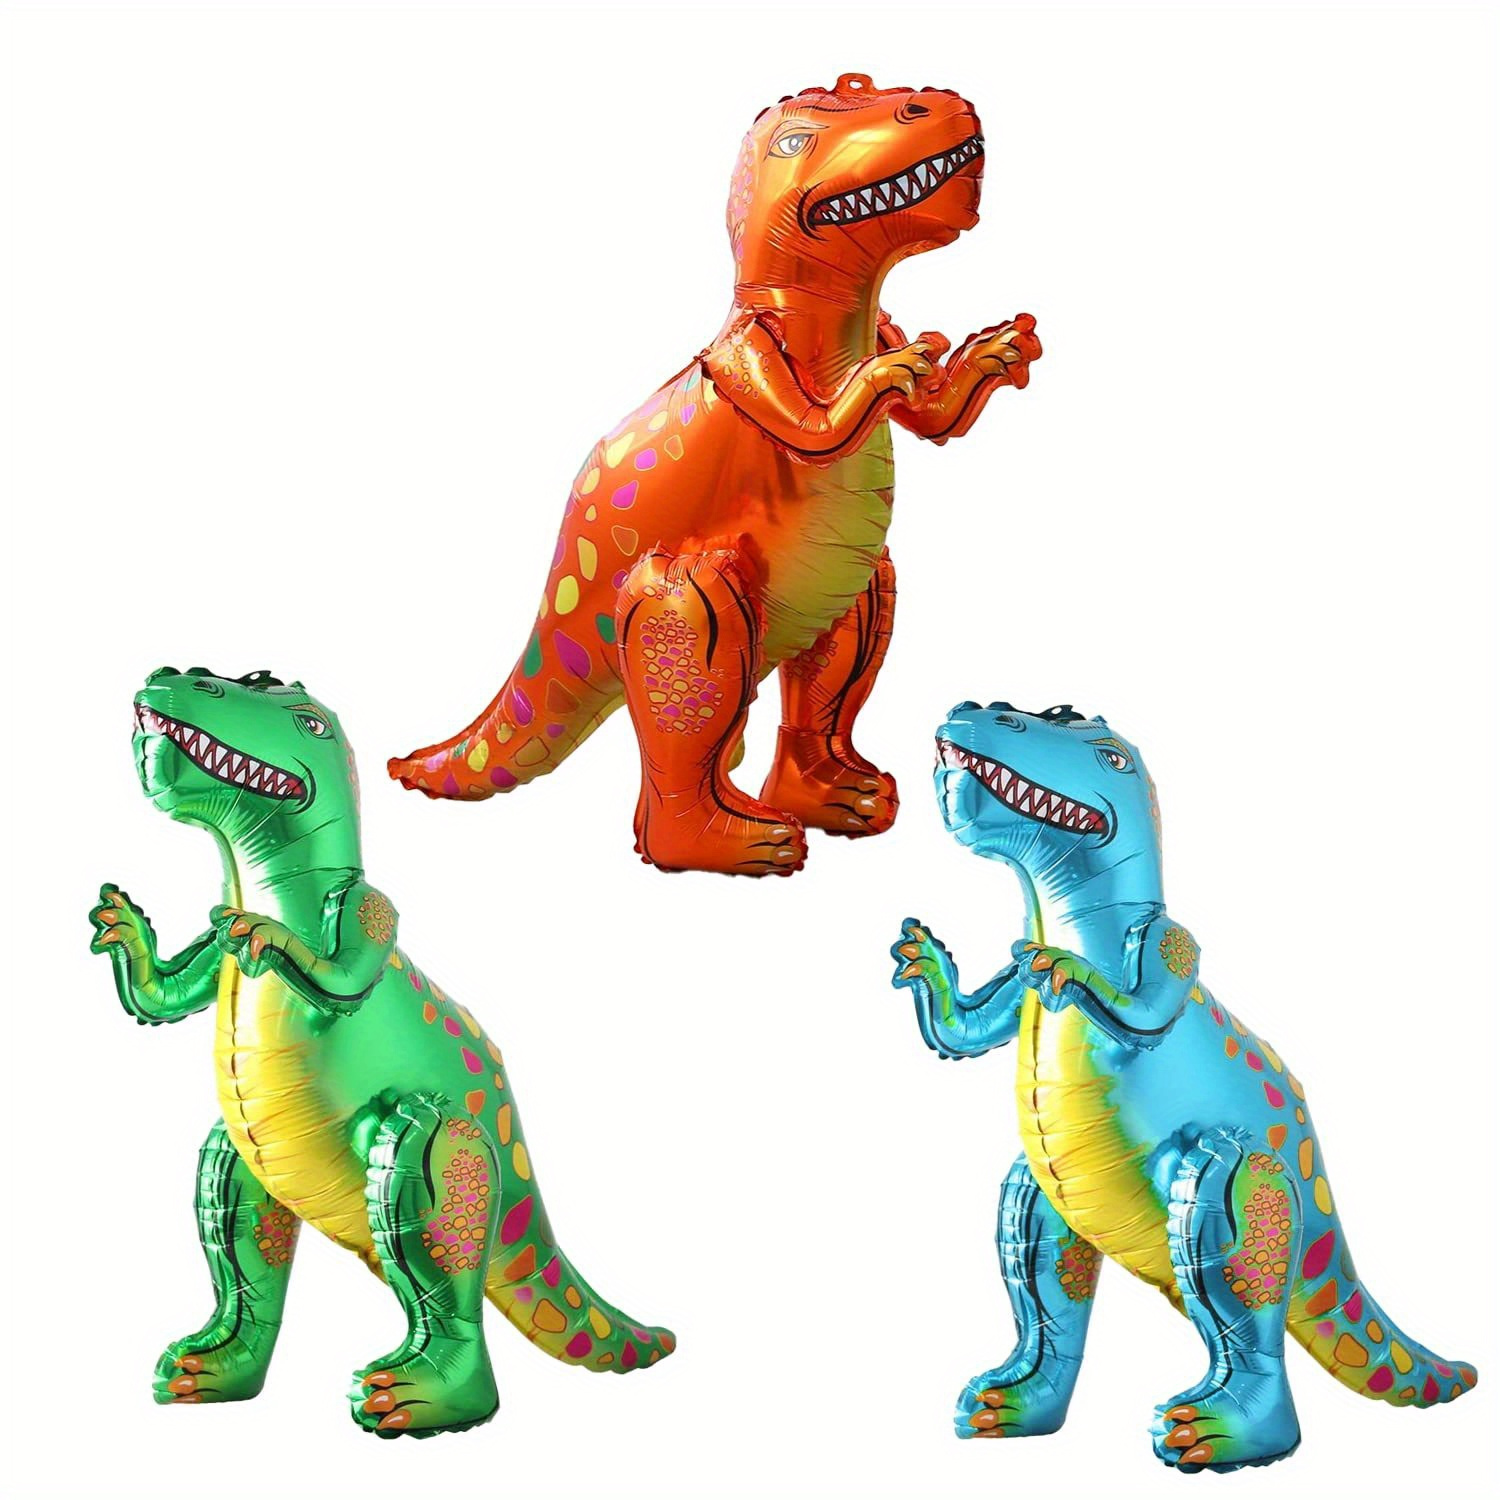 

3d Dinosaur Foil Balloon - Standing T-rex For Birthday, Baby Shower & Forest Theme Parties - Durable Aluminum Film Decor Transform Any Space Into A Prehistoric Adventure - Great For All Ages